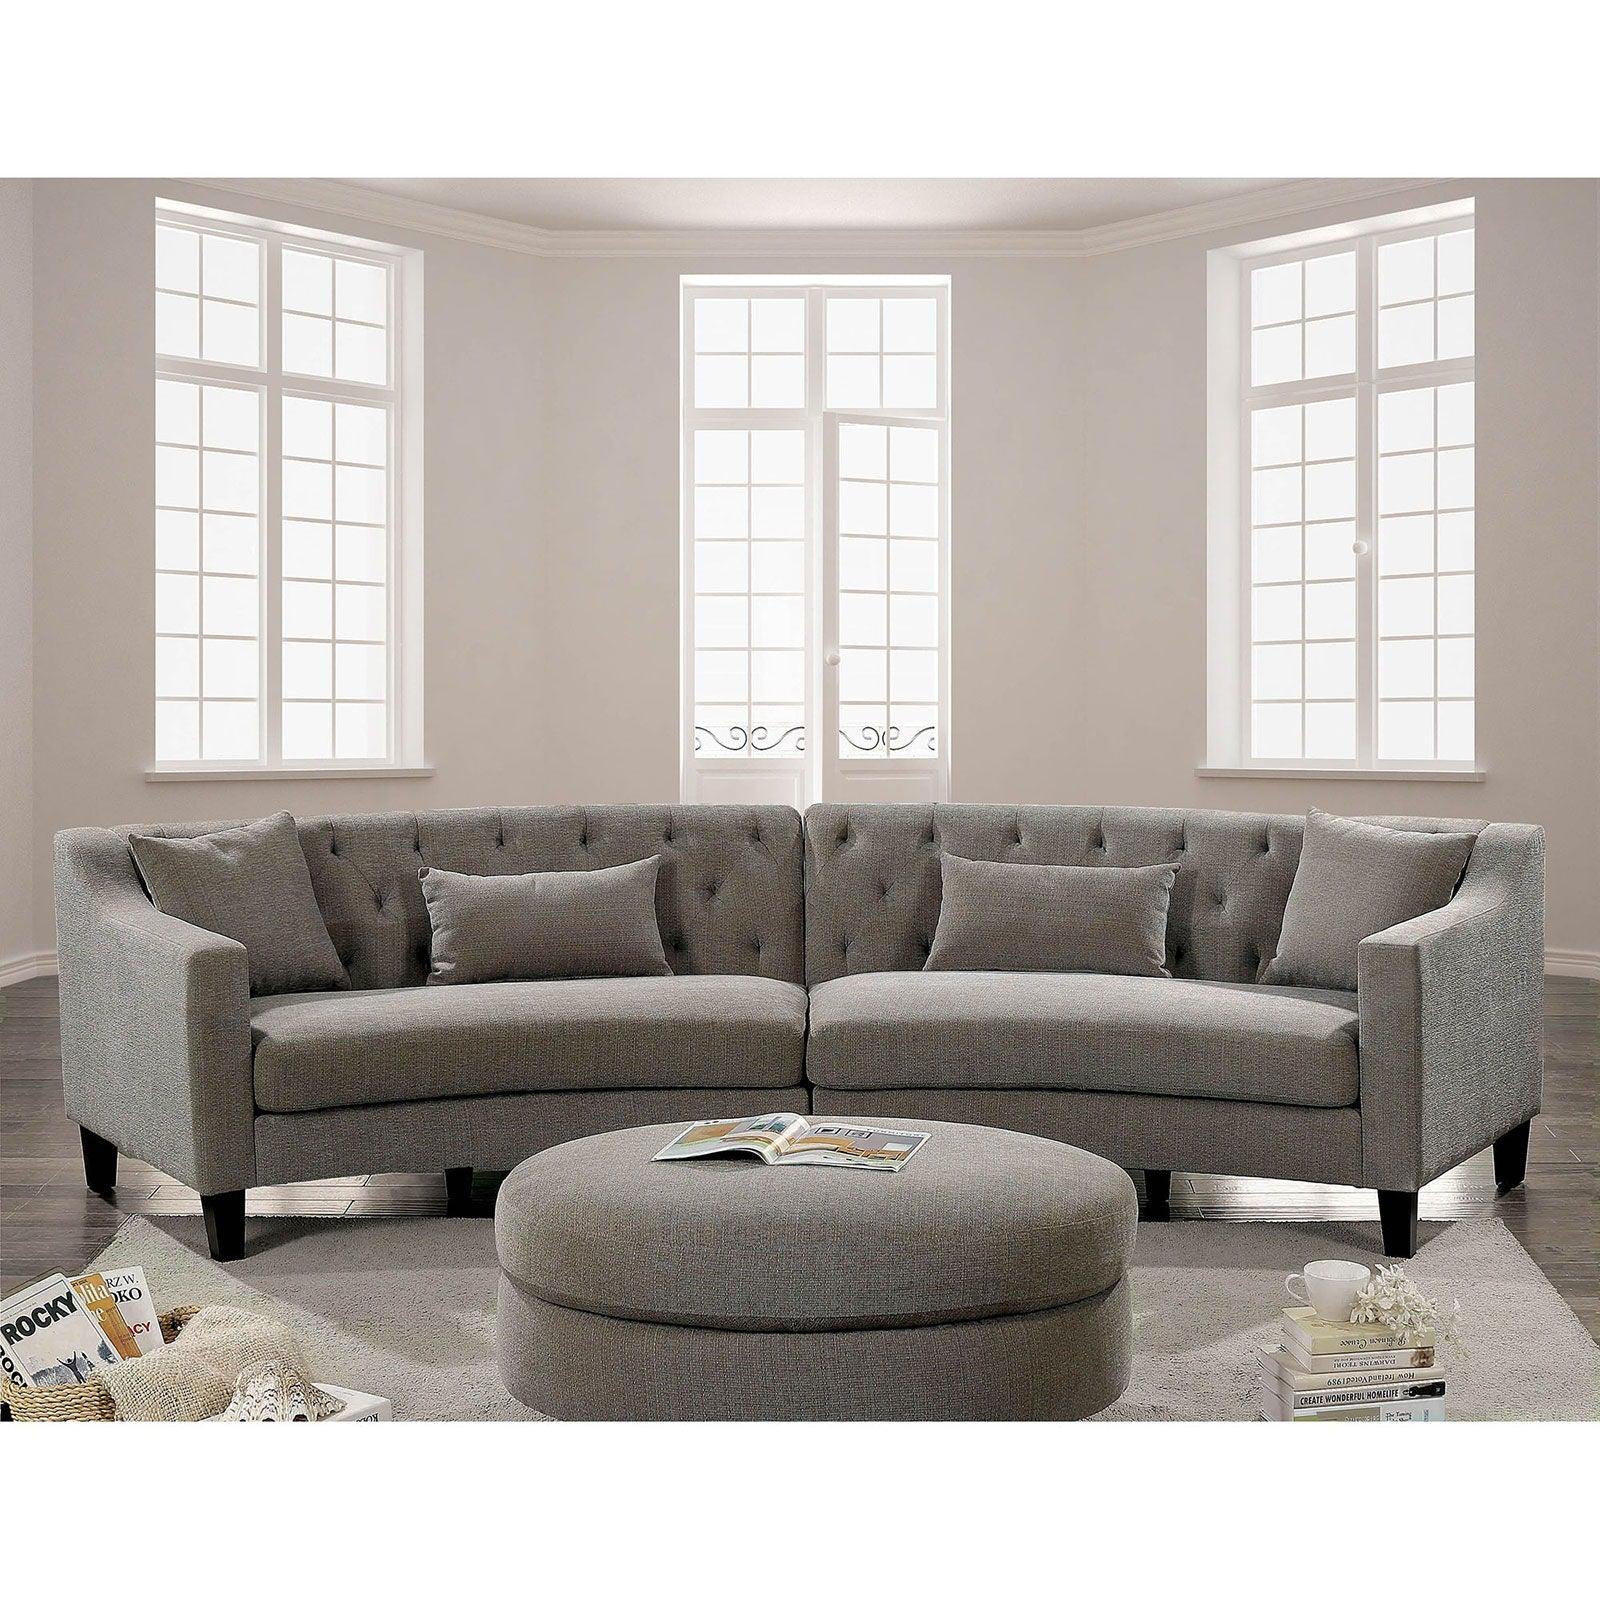 Furniture of America - Sarin - Sectional - Warm Gray - 5th Avenue Furniture